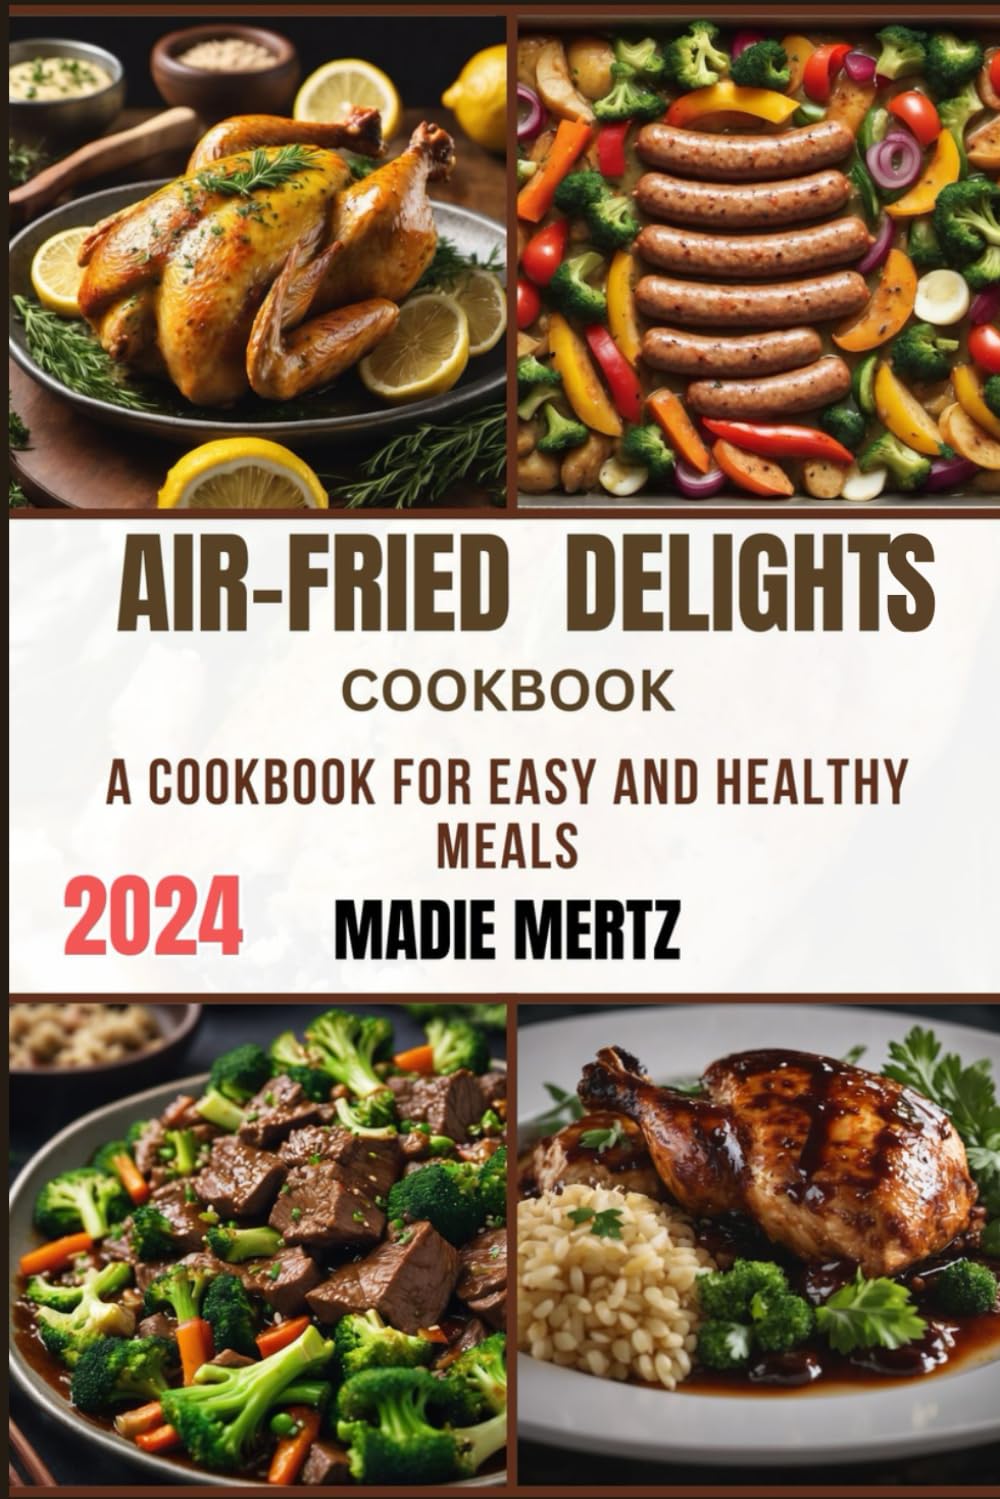 Air Fried Delights: A COOKBOOK FOR EASY AND HEALTHY MEALS